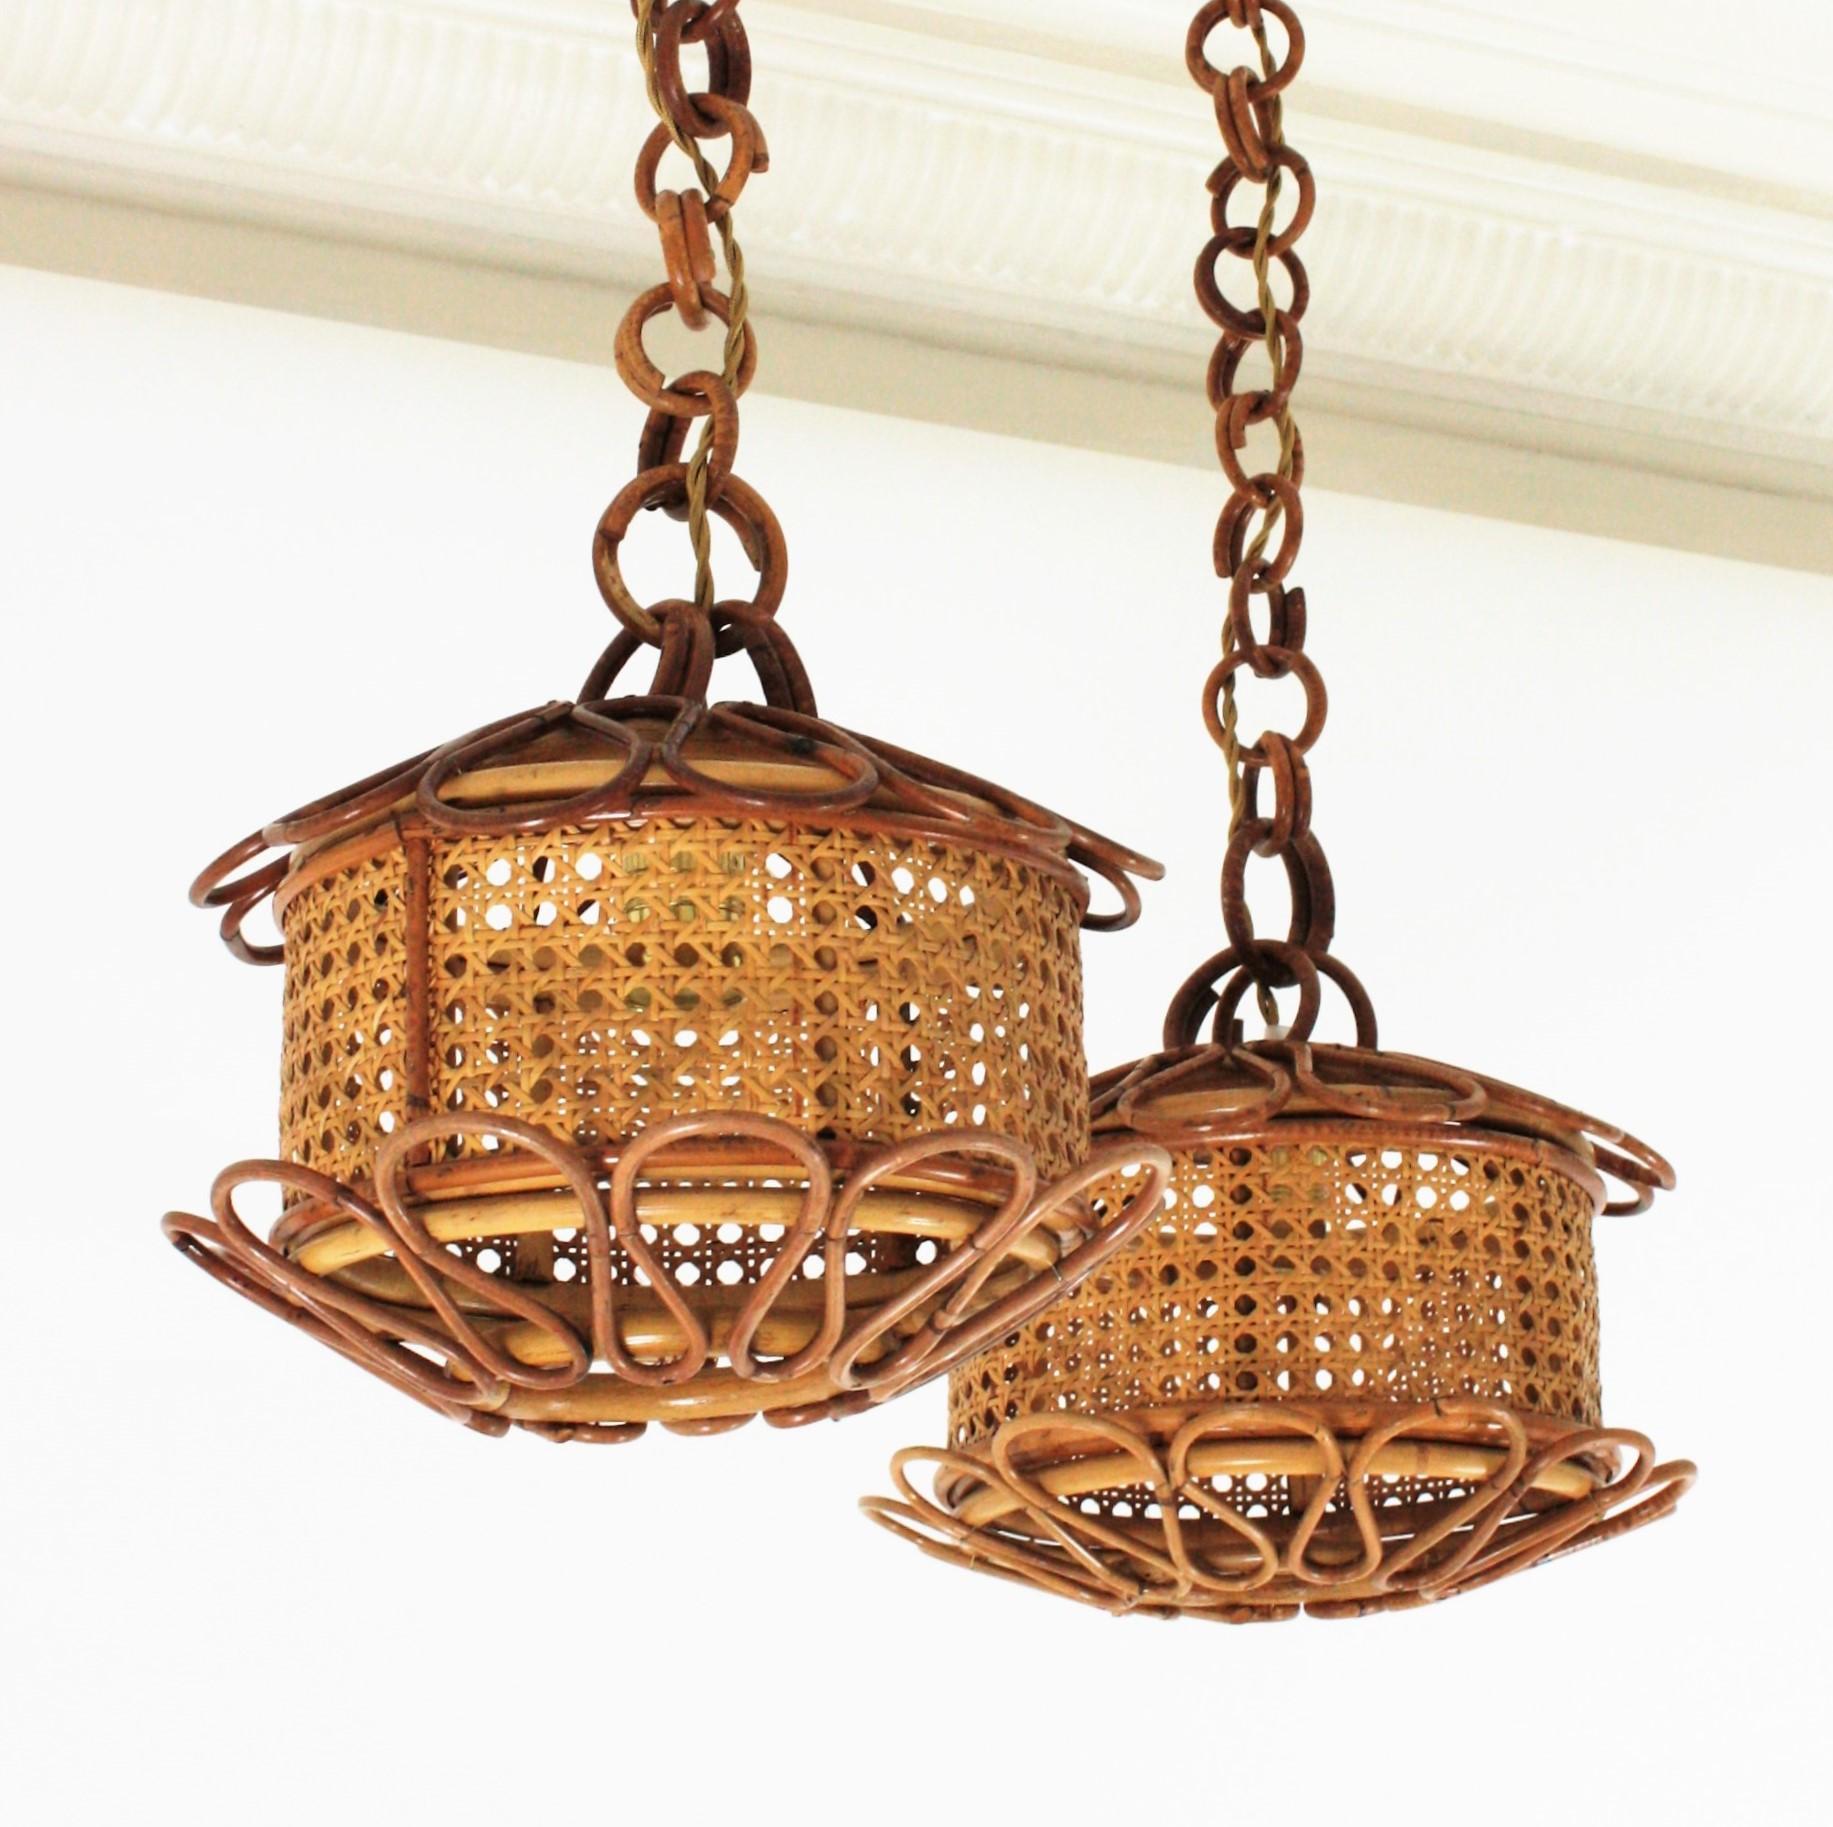 Pair of Mid-Century Modern woven wicker wire and rattan pendant lamps / lanterns, Italy, 1950s.
The woven wicker cylindrical shades of these lamps are accented by handcrafted rattan details as petals at the bottom part and at the top. They hang